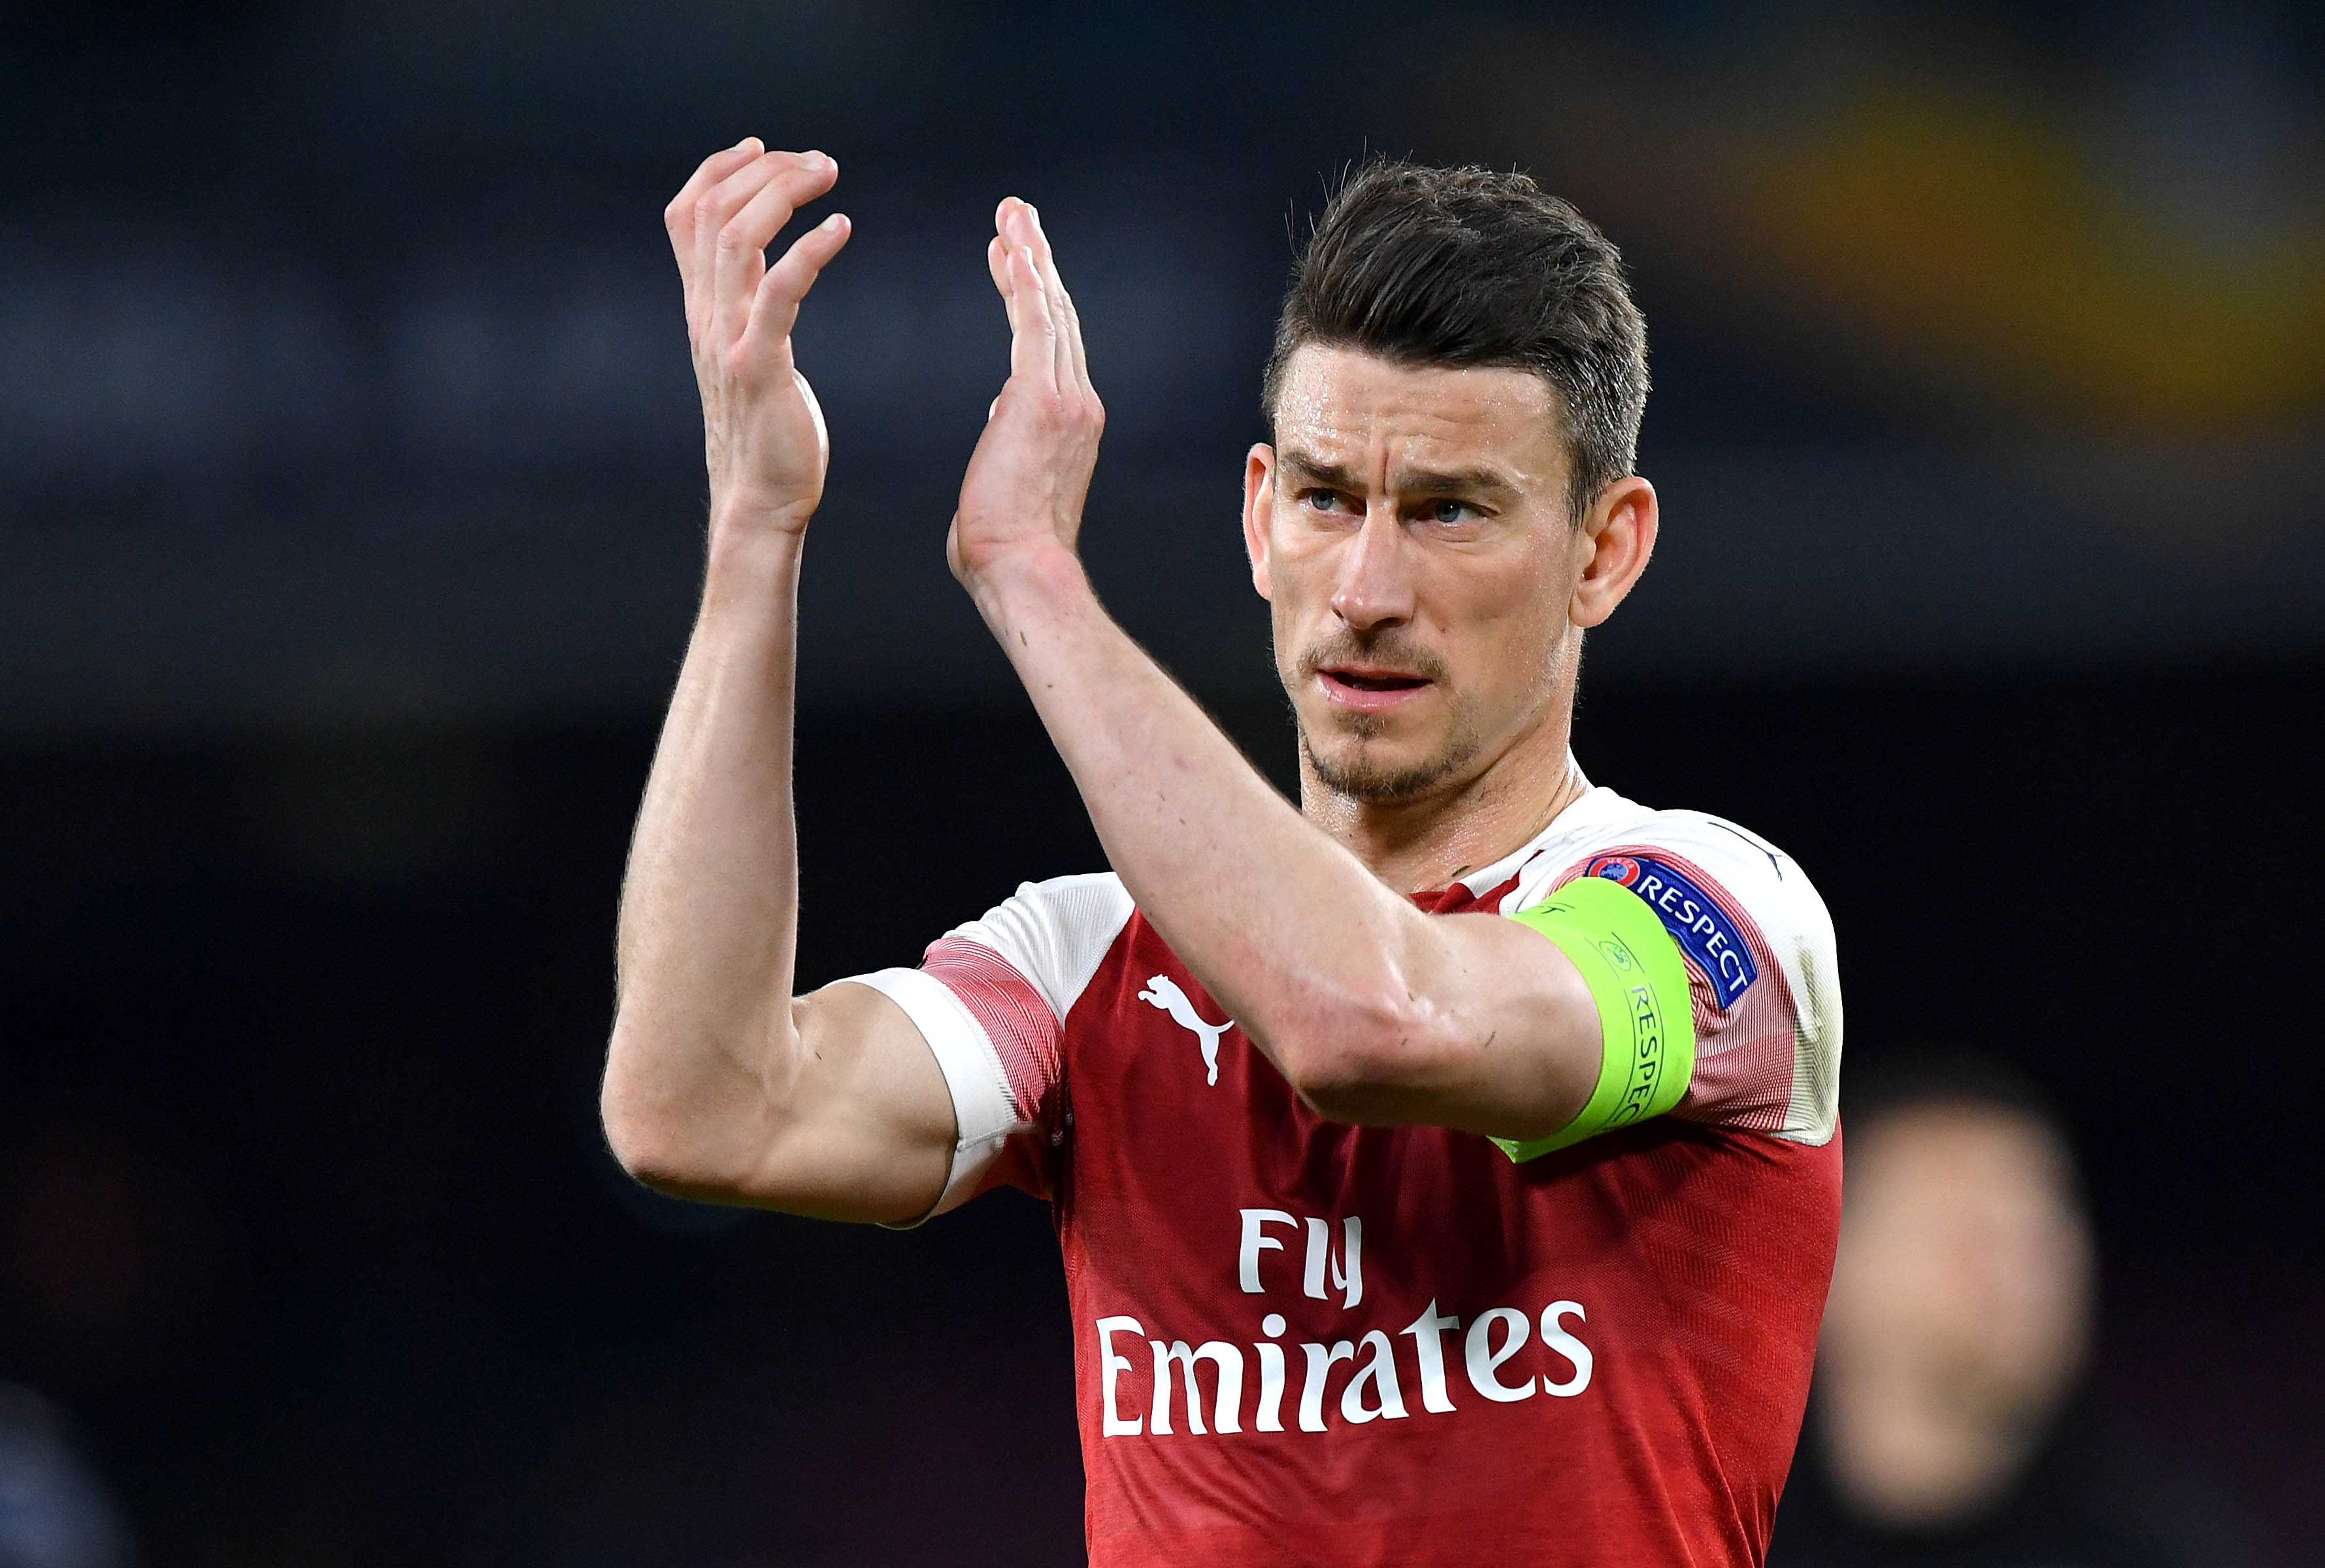 Koscielny is set to leave Arsenal. (Photo by Stuart Franklin/Getty Images)